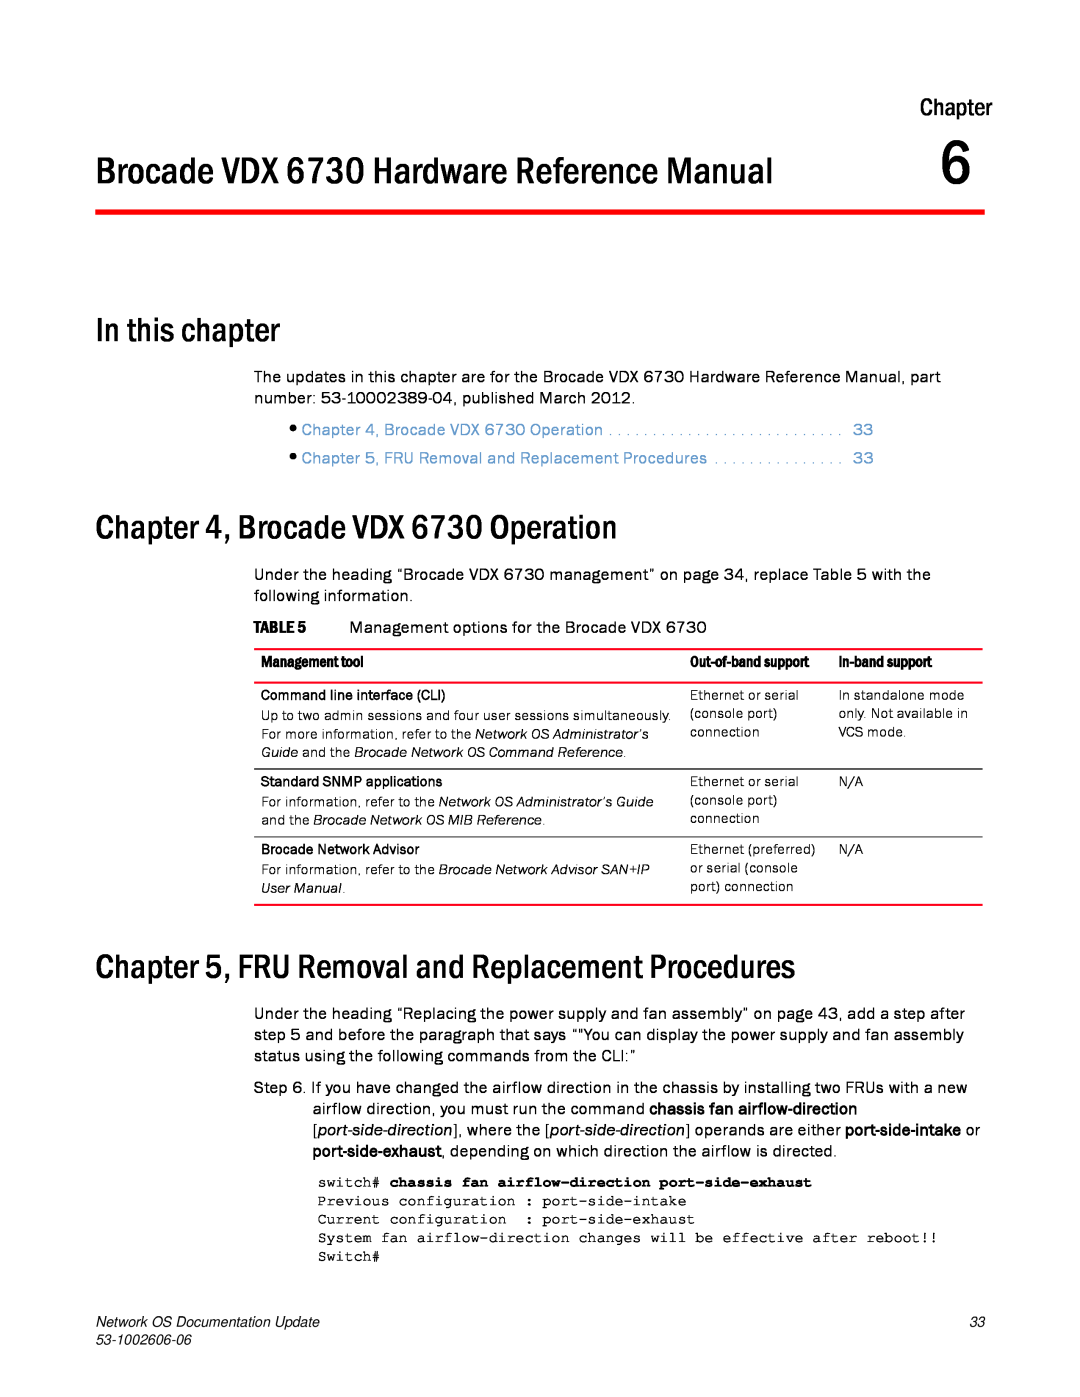 Brocade Communications Systems 2.1 Brocade VDX 6730 Hardware Reference Manual, Brocade VDX 6730 Operation, In this chapter 